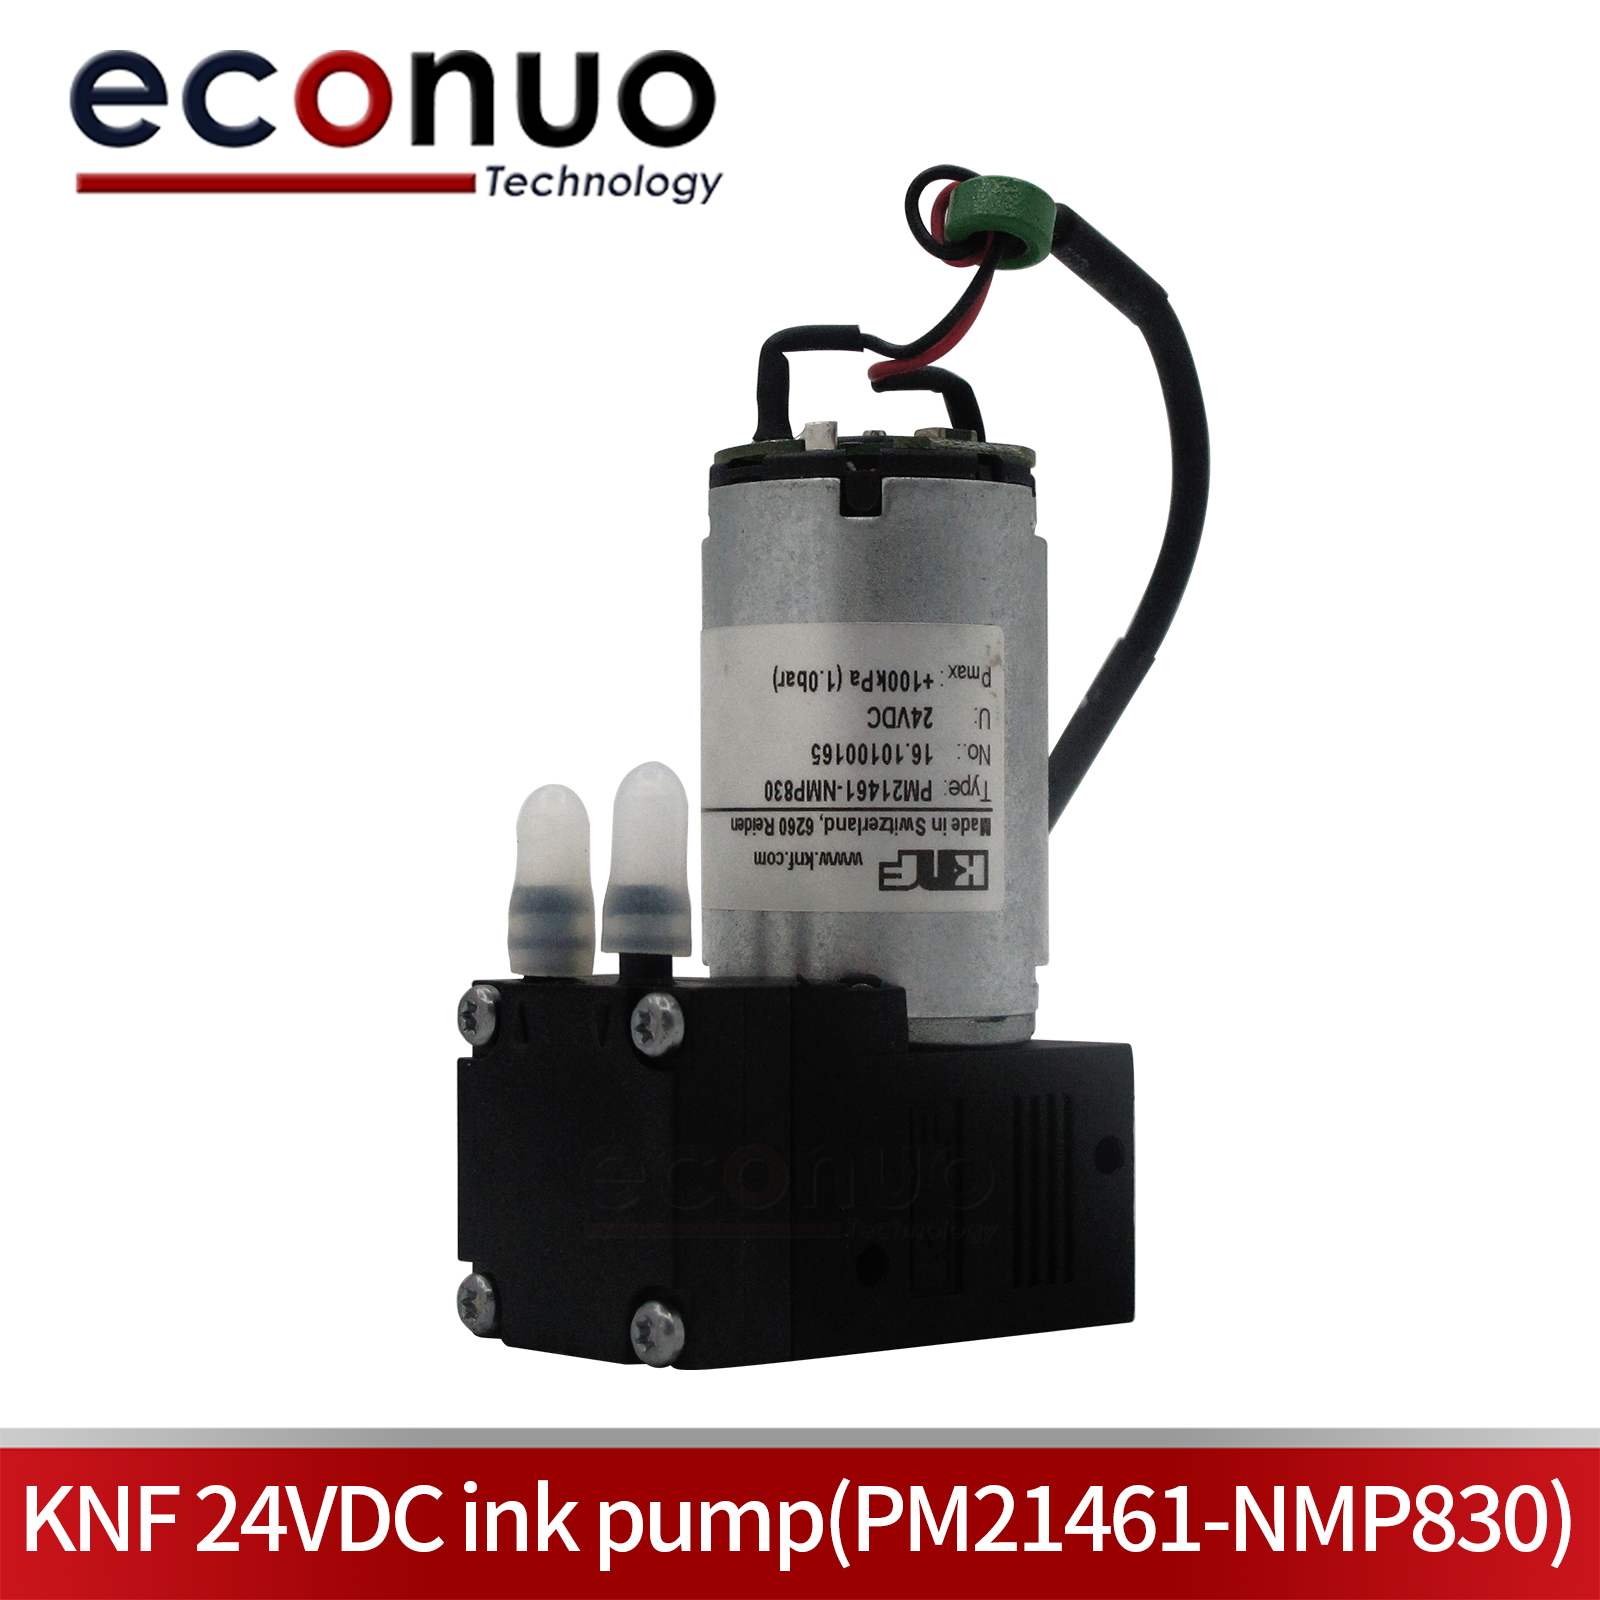 KNF2001 KNF 24VDC ink pump (PM21461-NMP830)